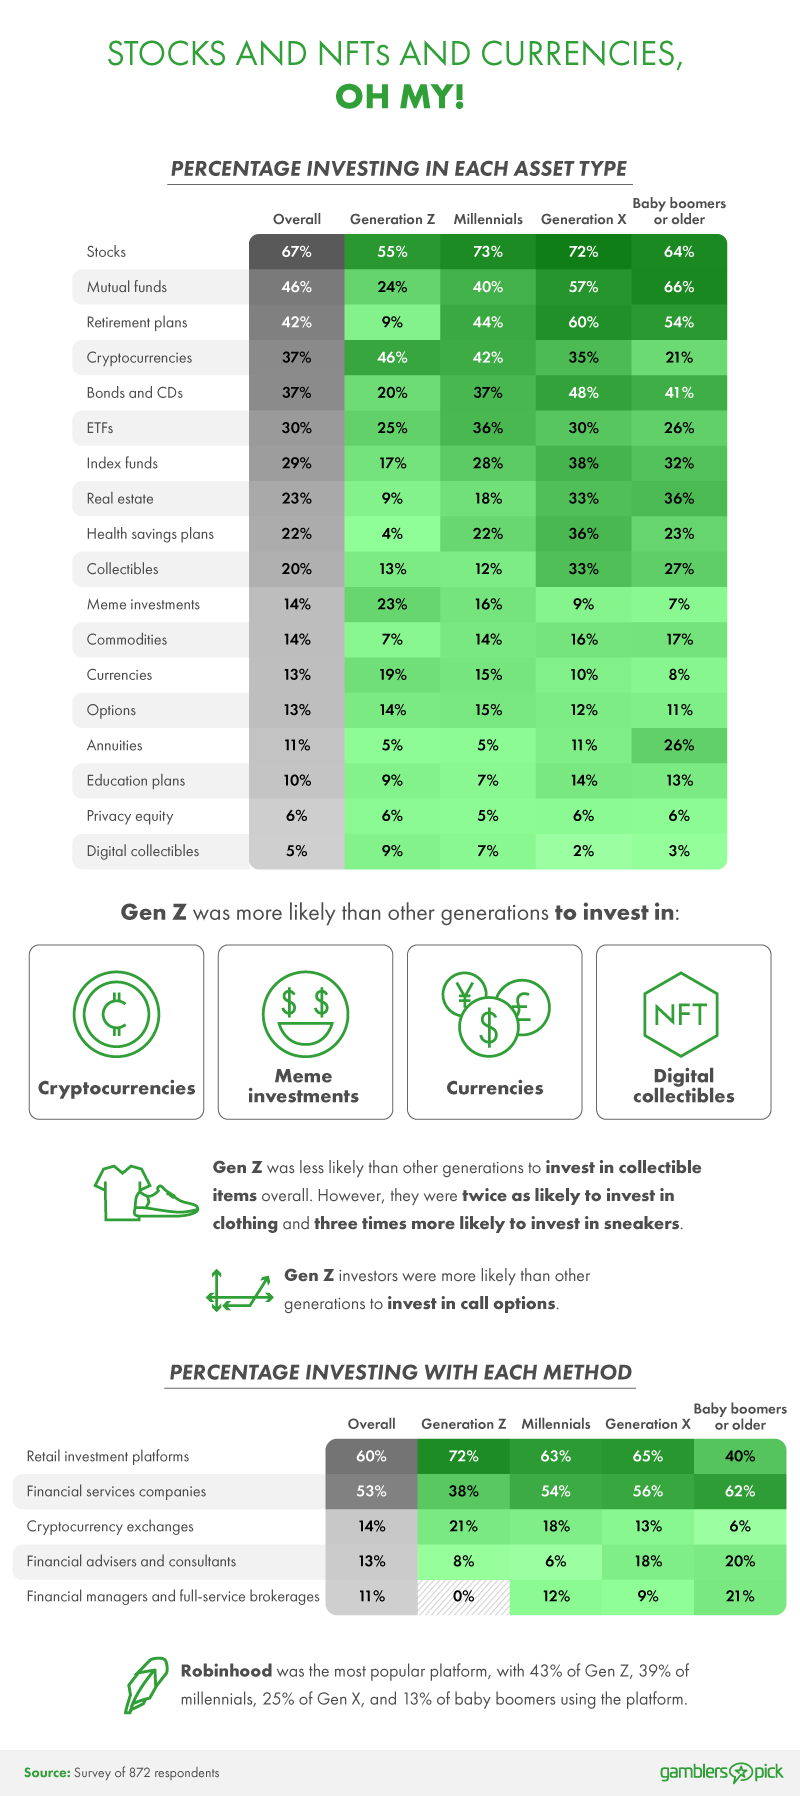 The different types of investments made by Gen Z compared to other generations.